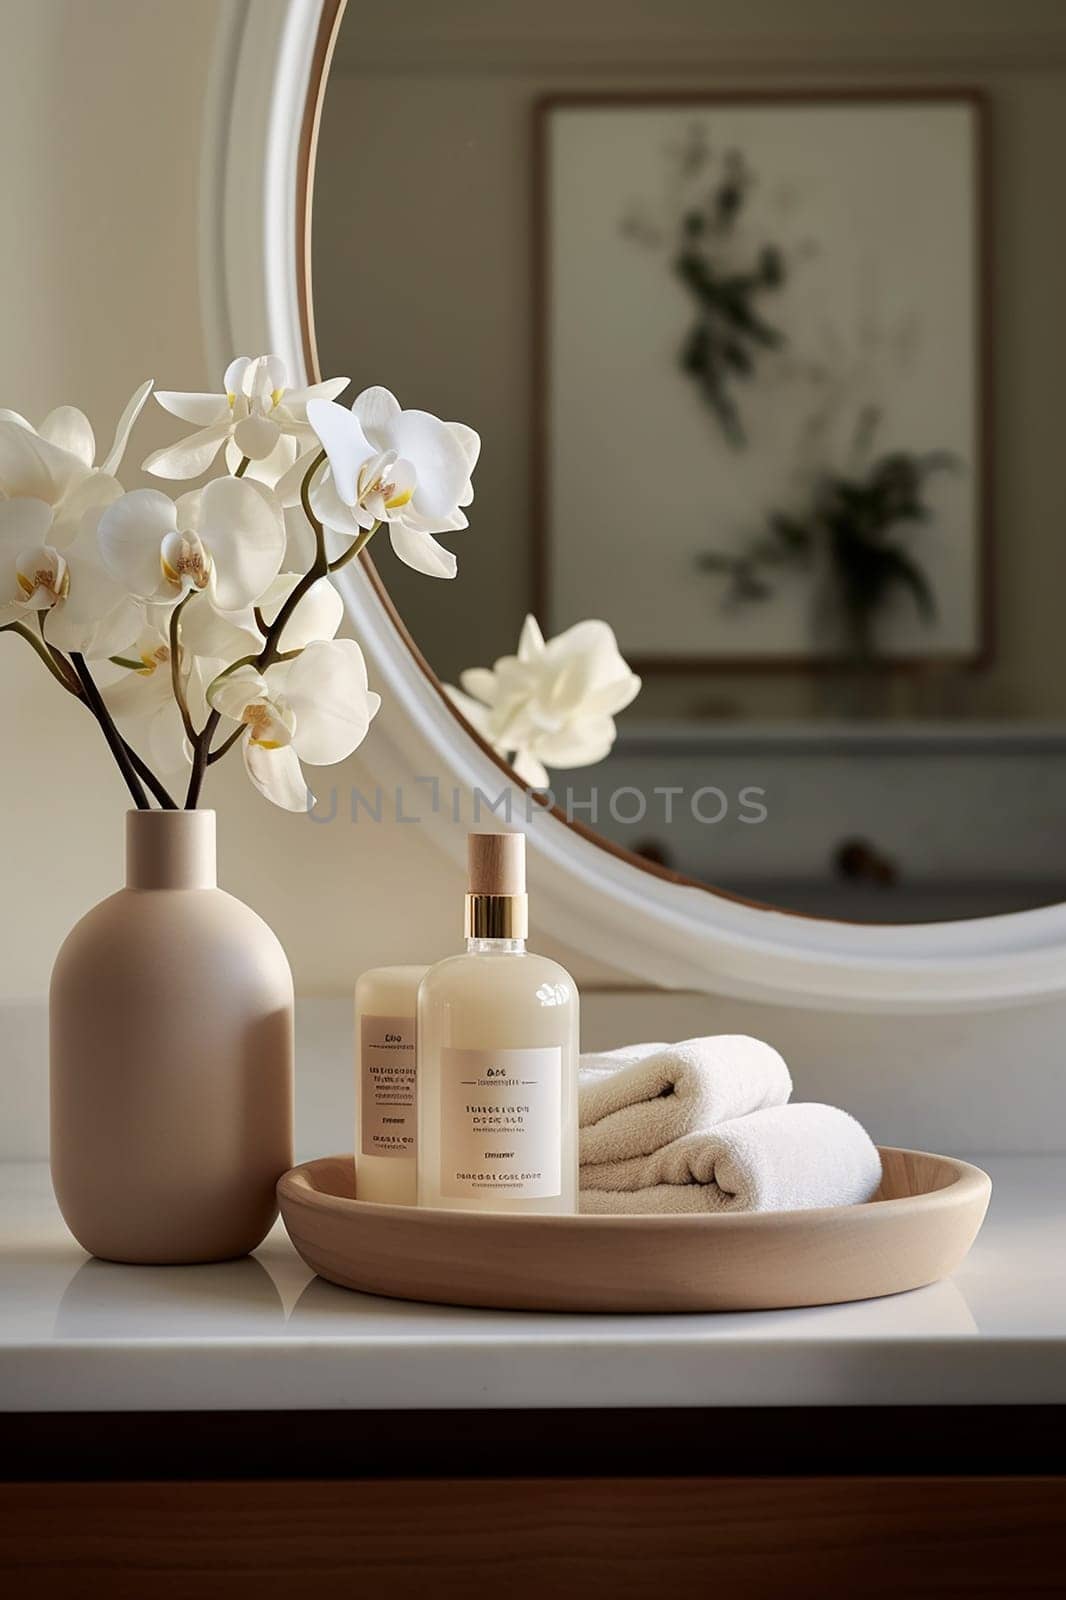 Elegant bathroom setup with orchids and wellness products reflecting tranquility. by Hype2art